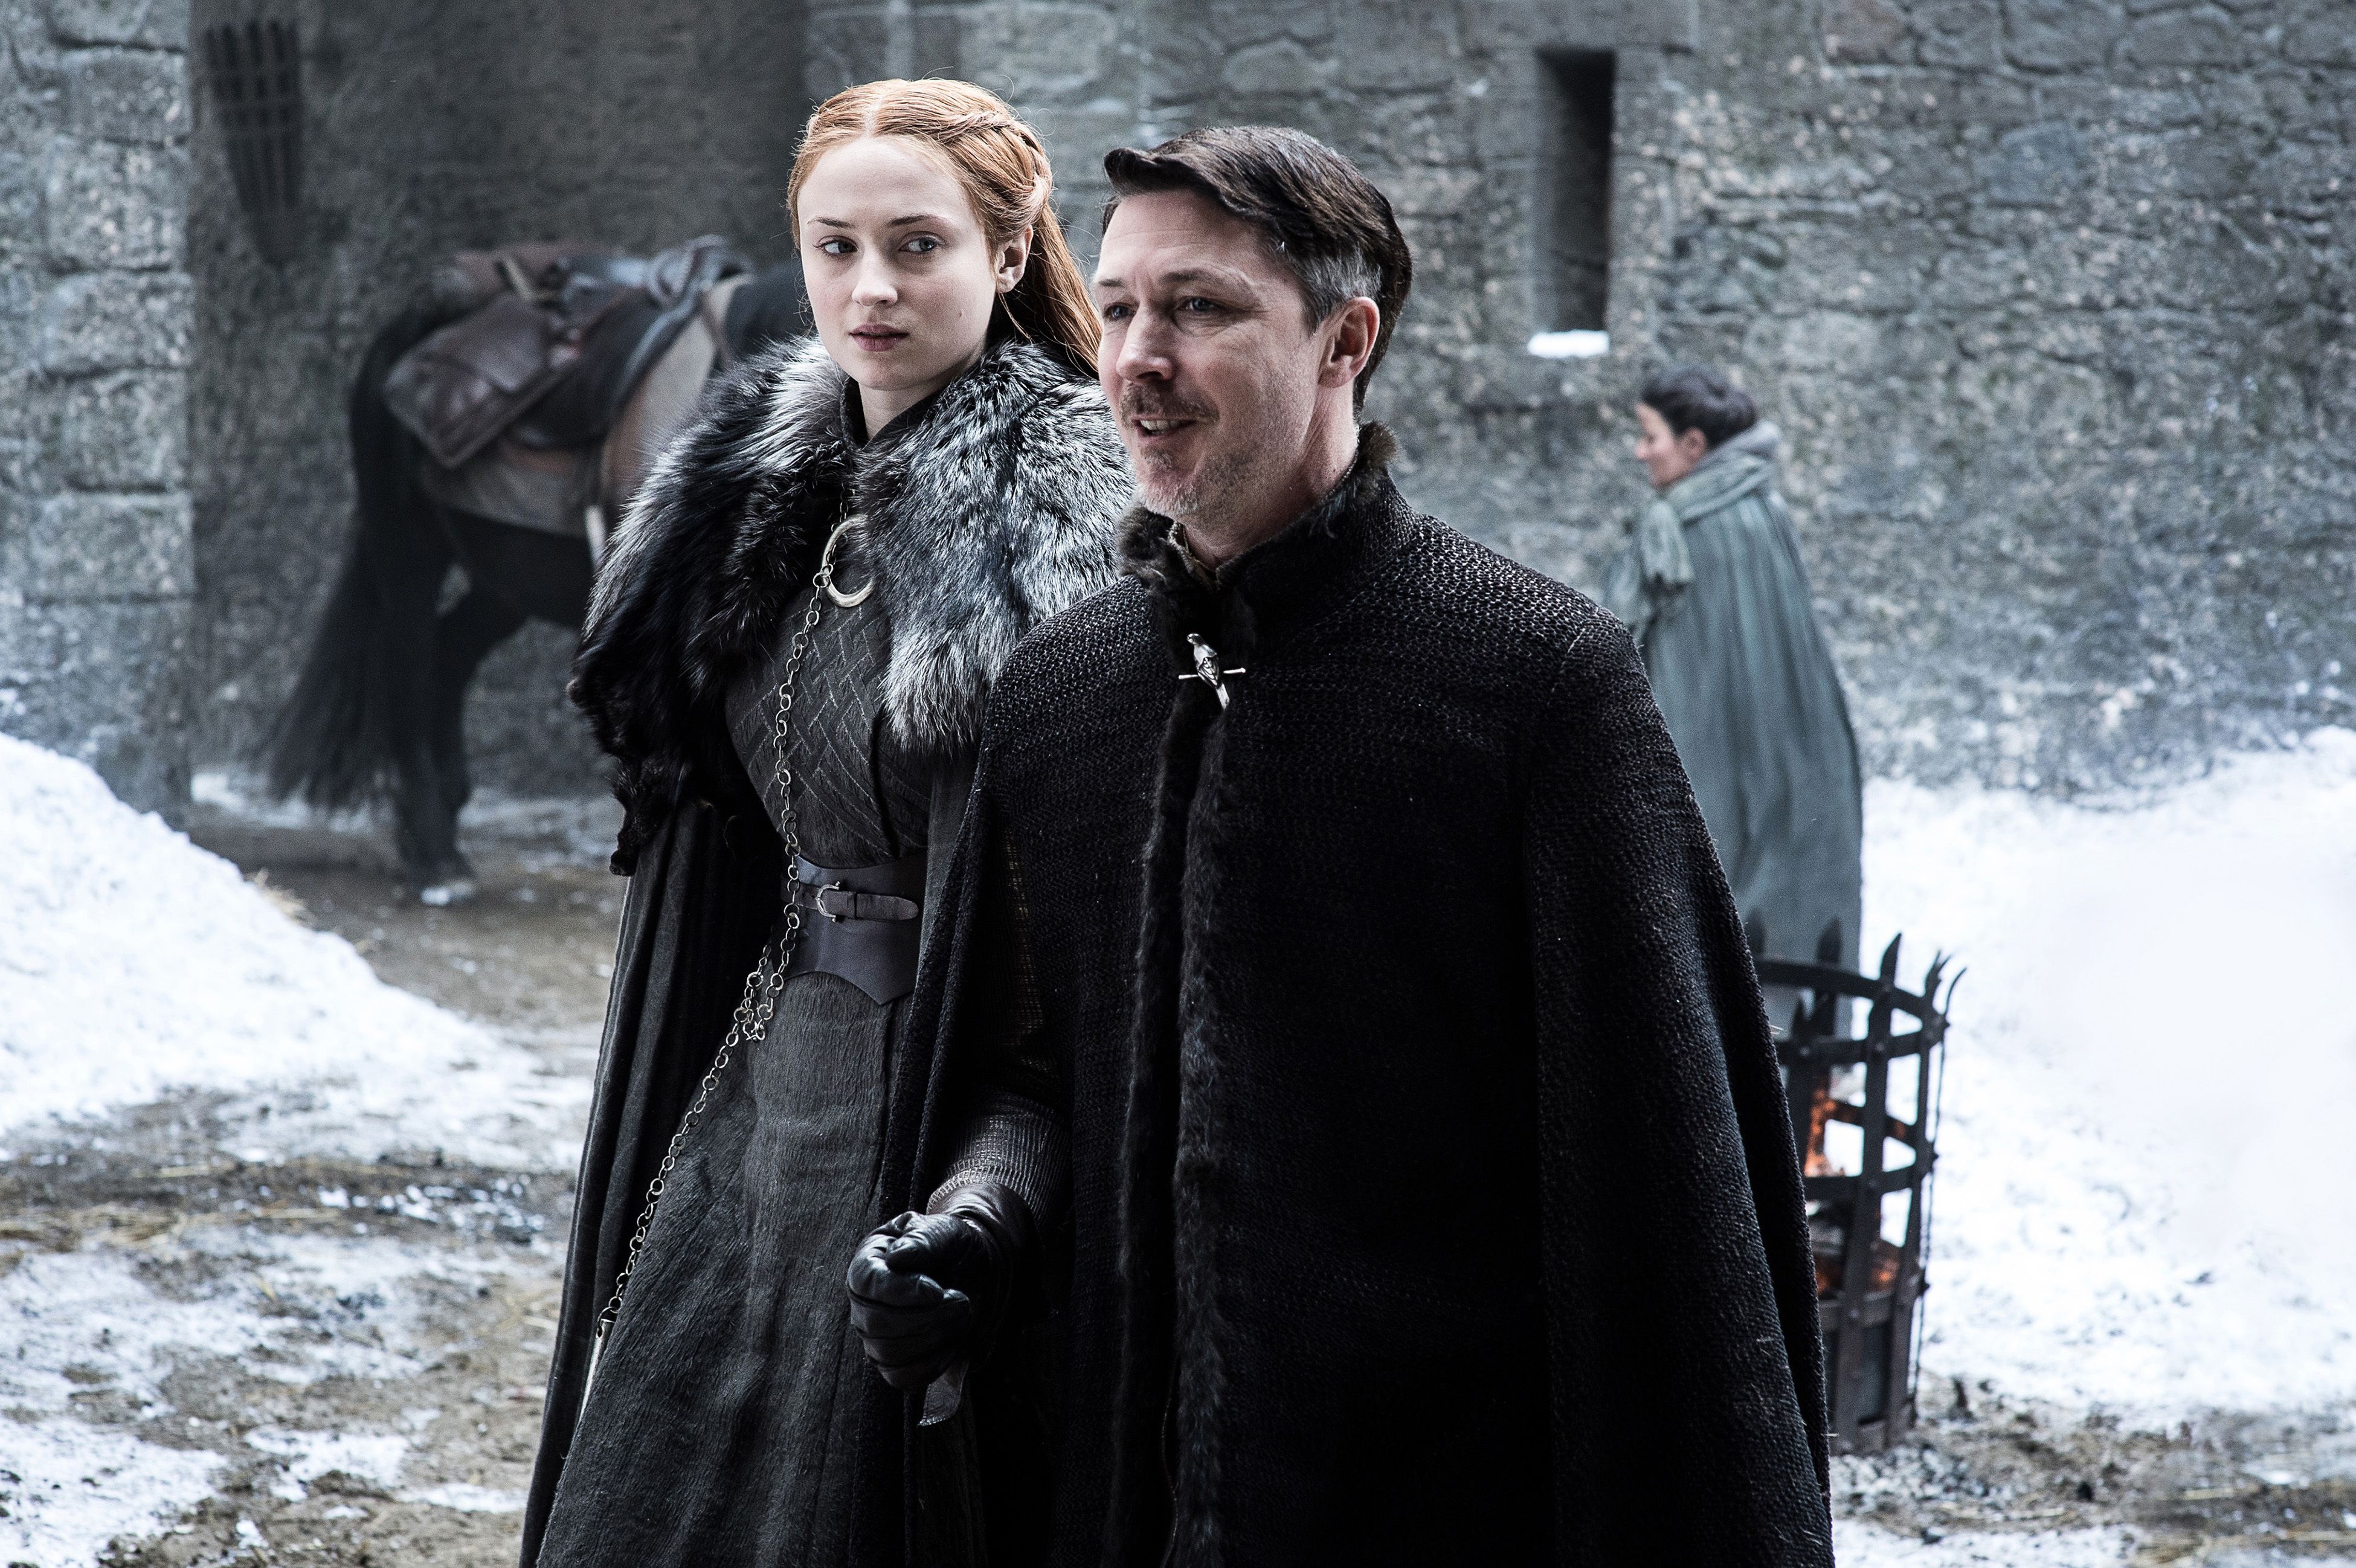 got1 Recapping Game of Thrones: The Queens Justice Finds Poetry in Westeros